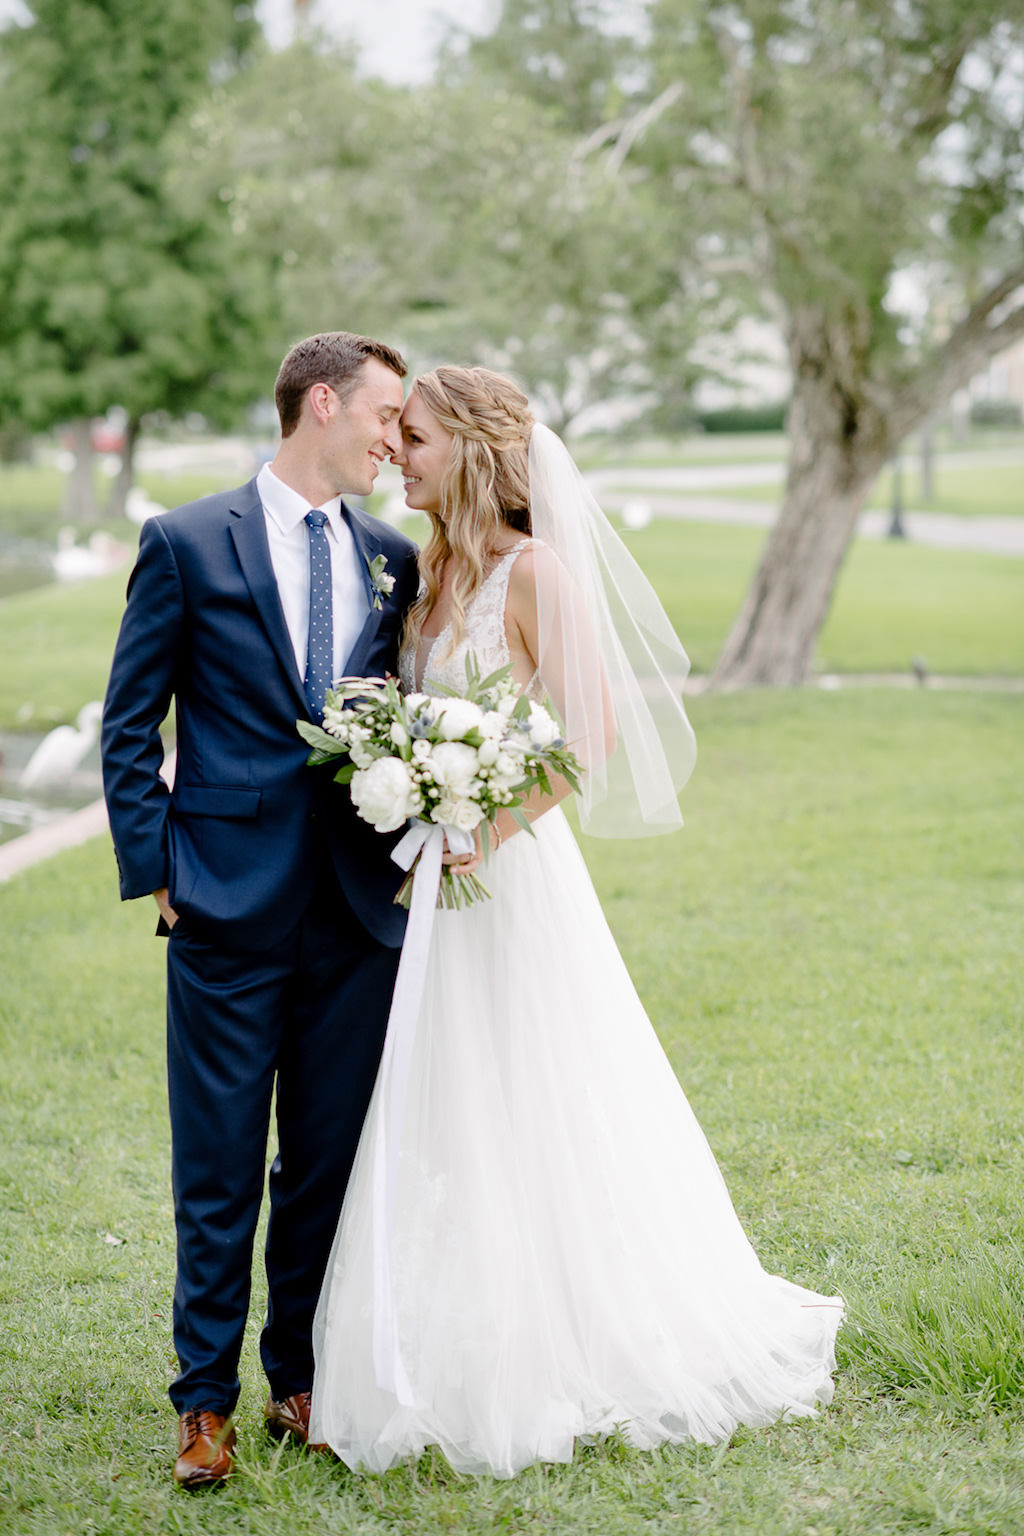 Outdoor Bride and Groom First Look Wedding Portrait, Groom in Navy Blue Suit and White Floral Boutonniere, Bride in White A-Line Illusion Tank Top Strap Plunging V-Neckline and Lace Bodice Wedding Dress with White Floral and Greenery Bouquet and Braided Half-Updo